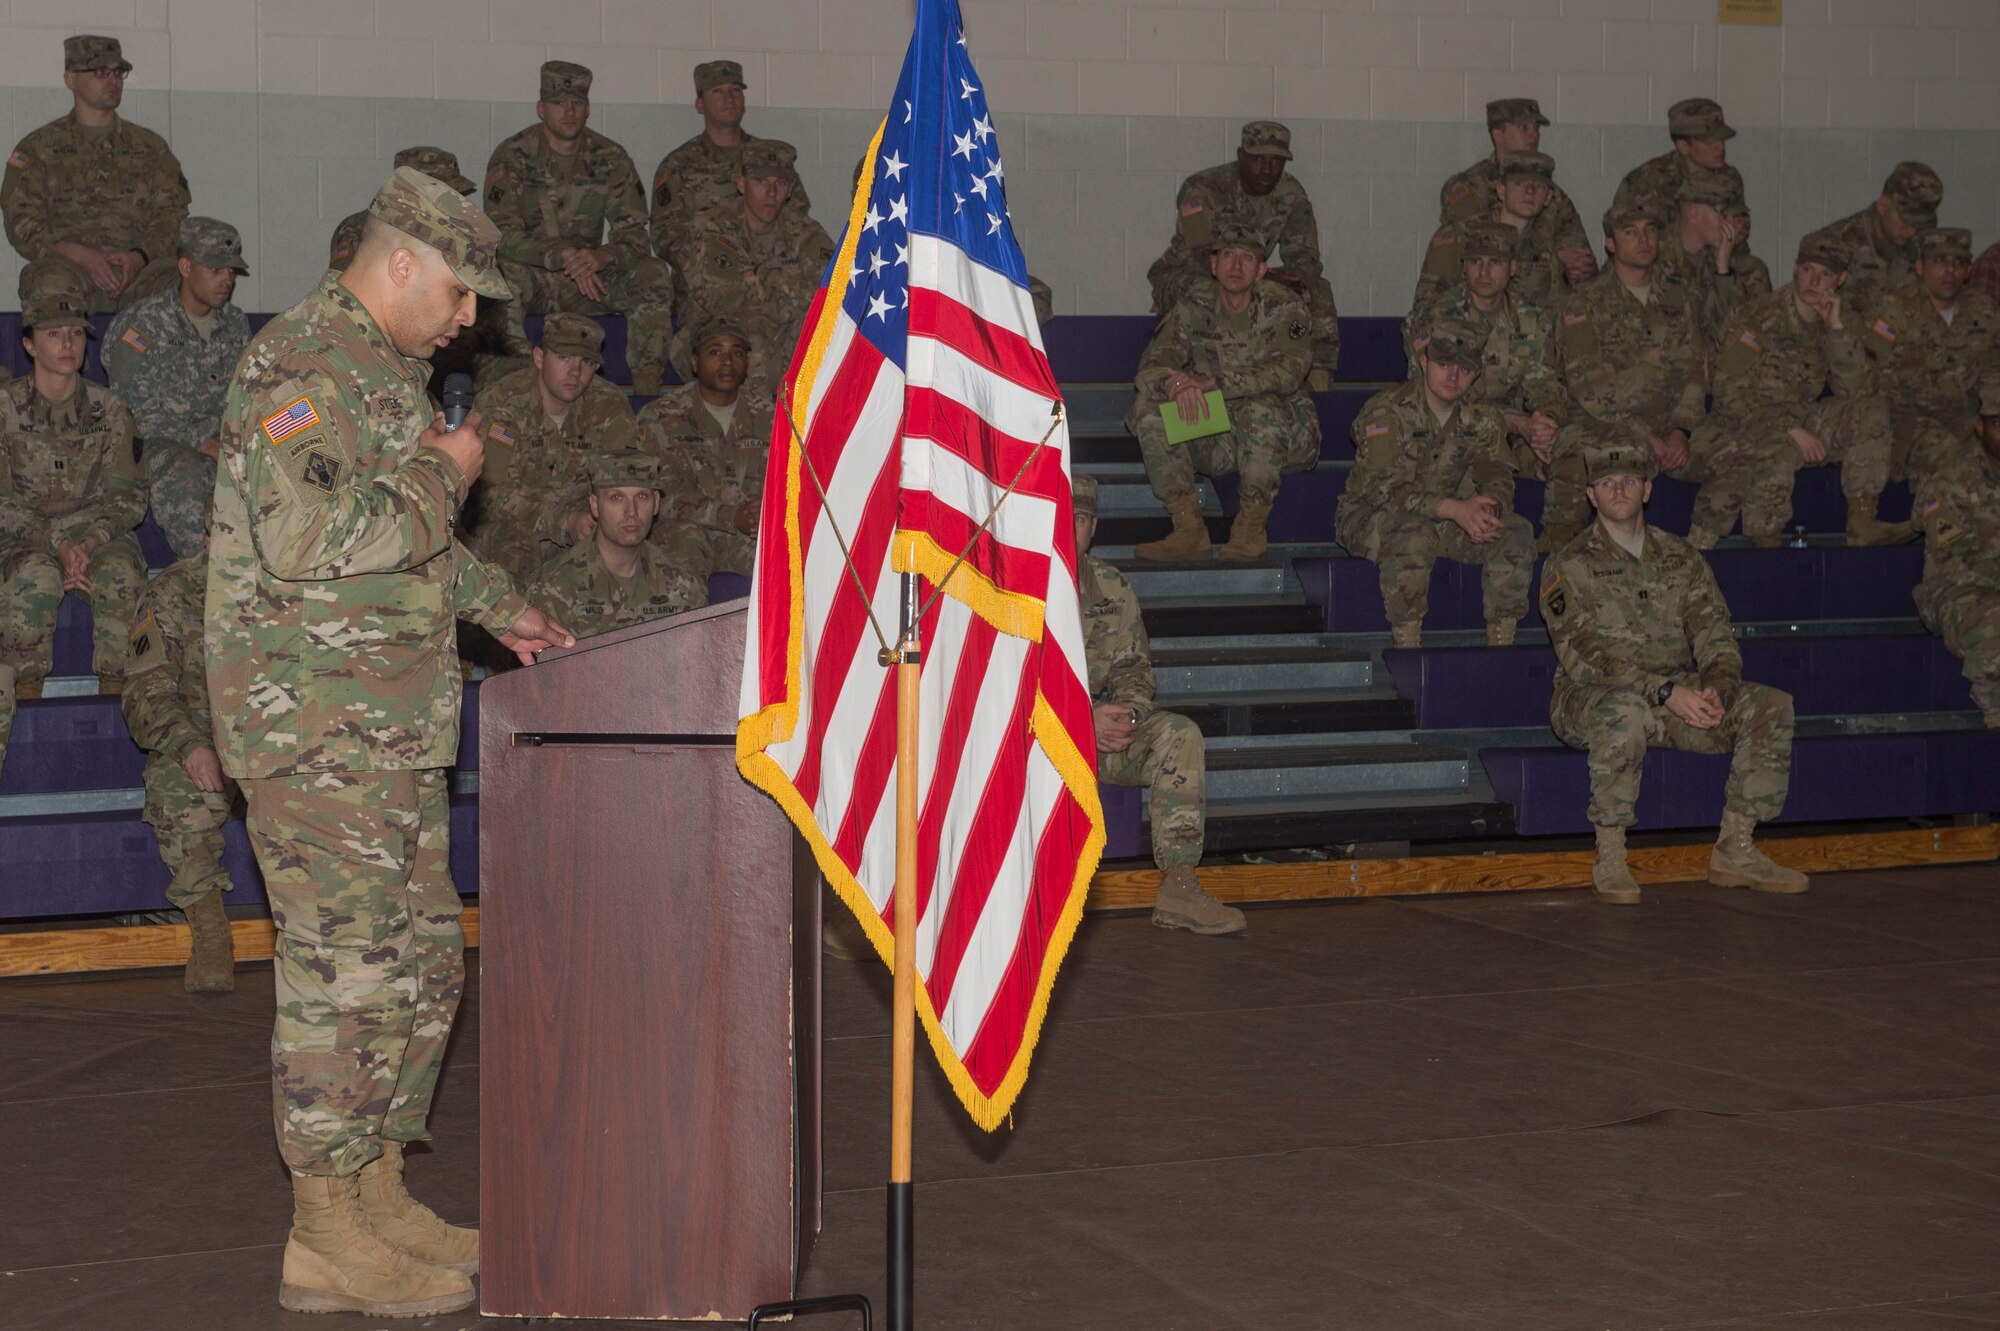 U.S. Army Lt. Col Perry Stiemke, commander 92nd Engineer Battalion, 20th Engineer Brigade, speaks during a deployment ceremony at Joint Base Langley-Eustis, Va., Jan. 24, 2018. The 74th Dive Detachment conducted several field training exercises and small diving missions to prepare for an upcoming deployment in support of Operation Spartan Shield. (U.S. Air Force photo by Senior Airman Derek Seifert)